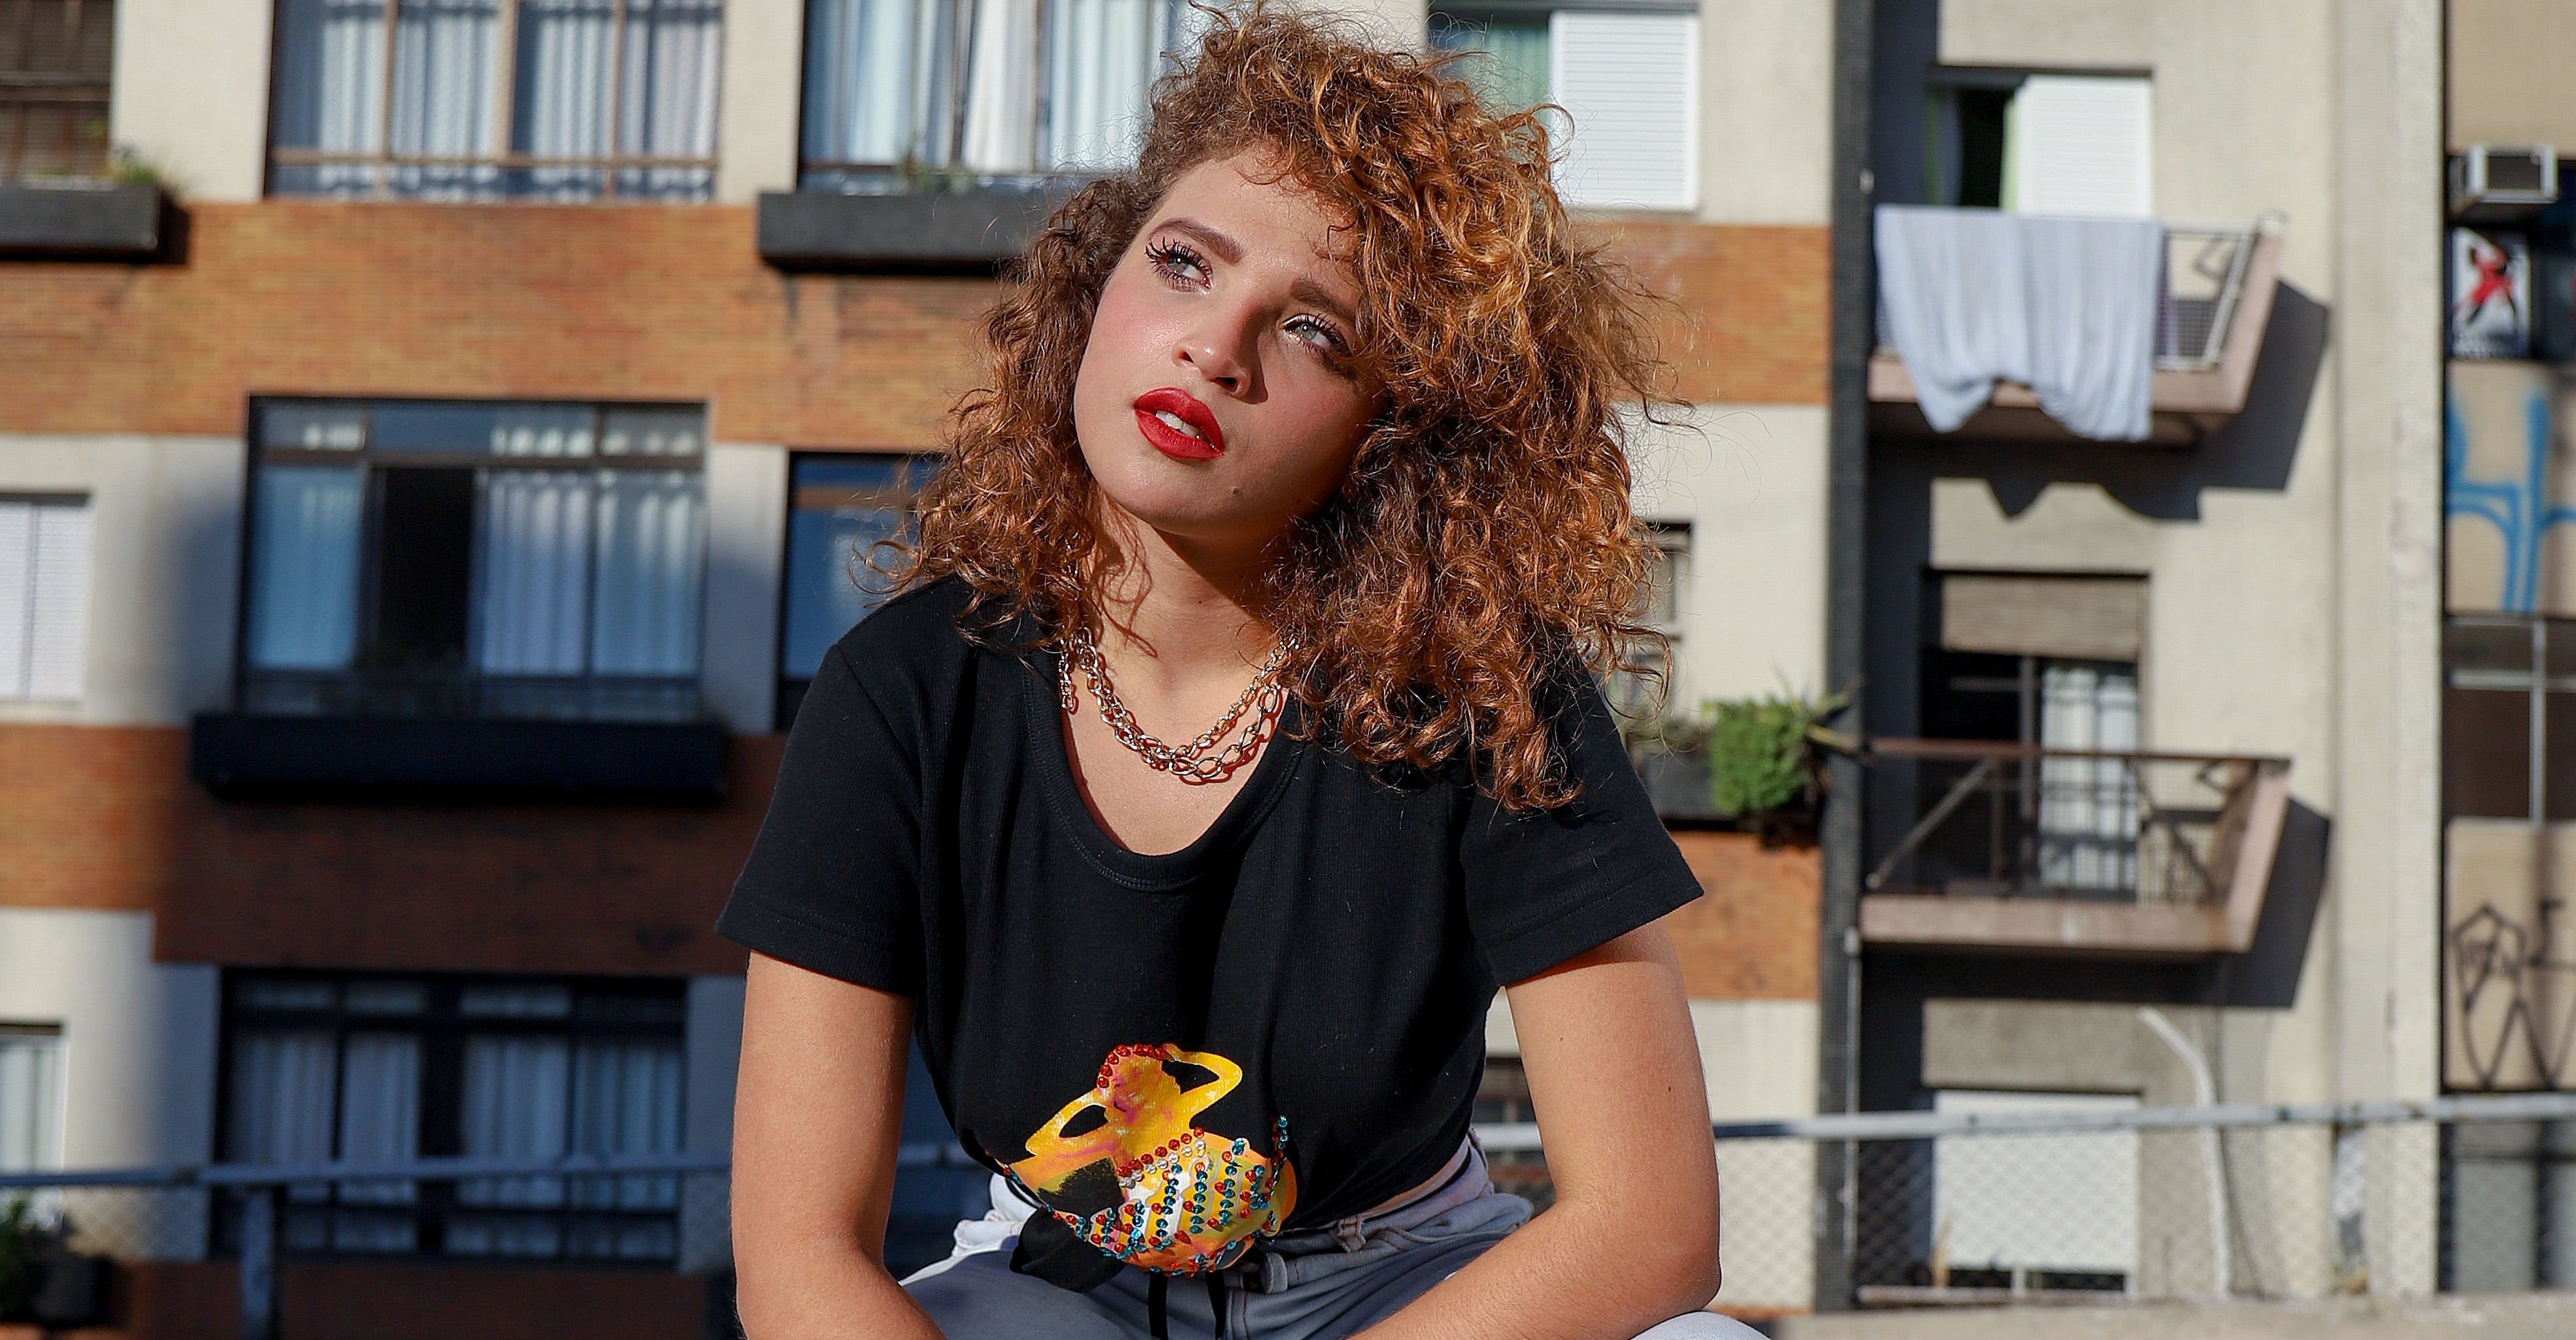 A woman with curly hair and red lipstick in a black t-shirt and jeans.